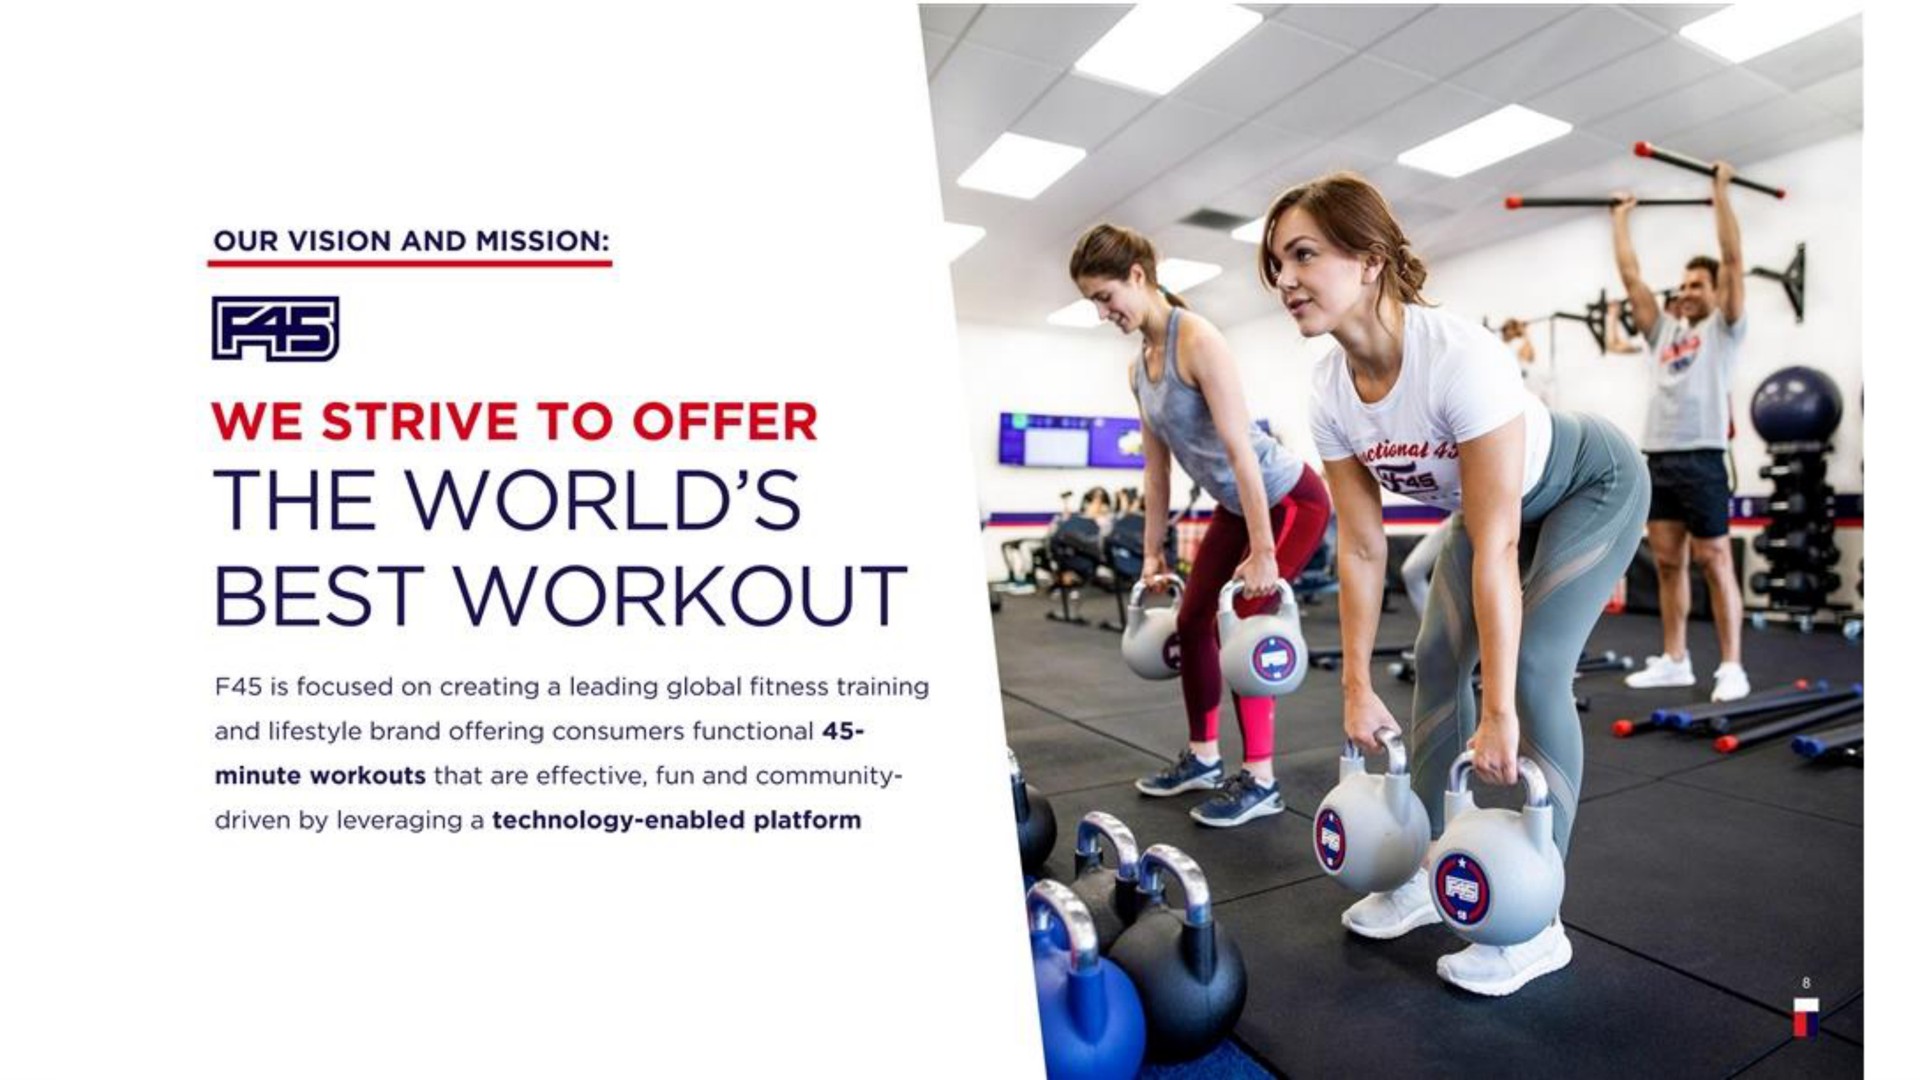 fas we strive to offer the world best workout | F45